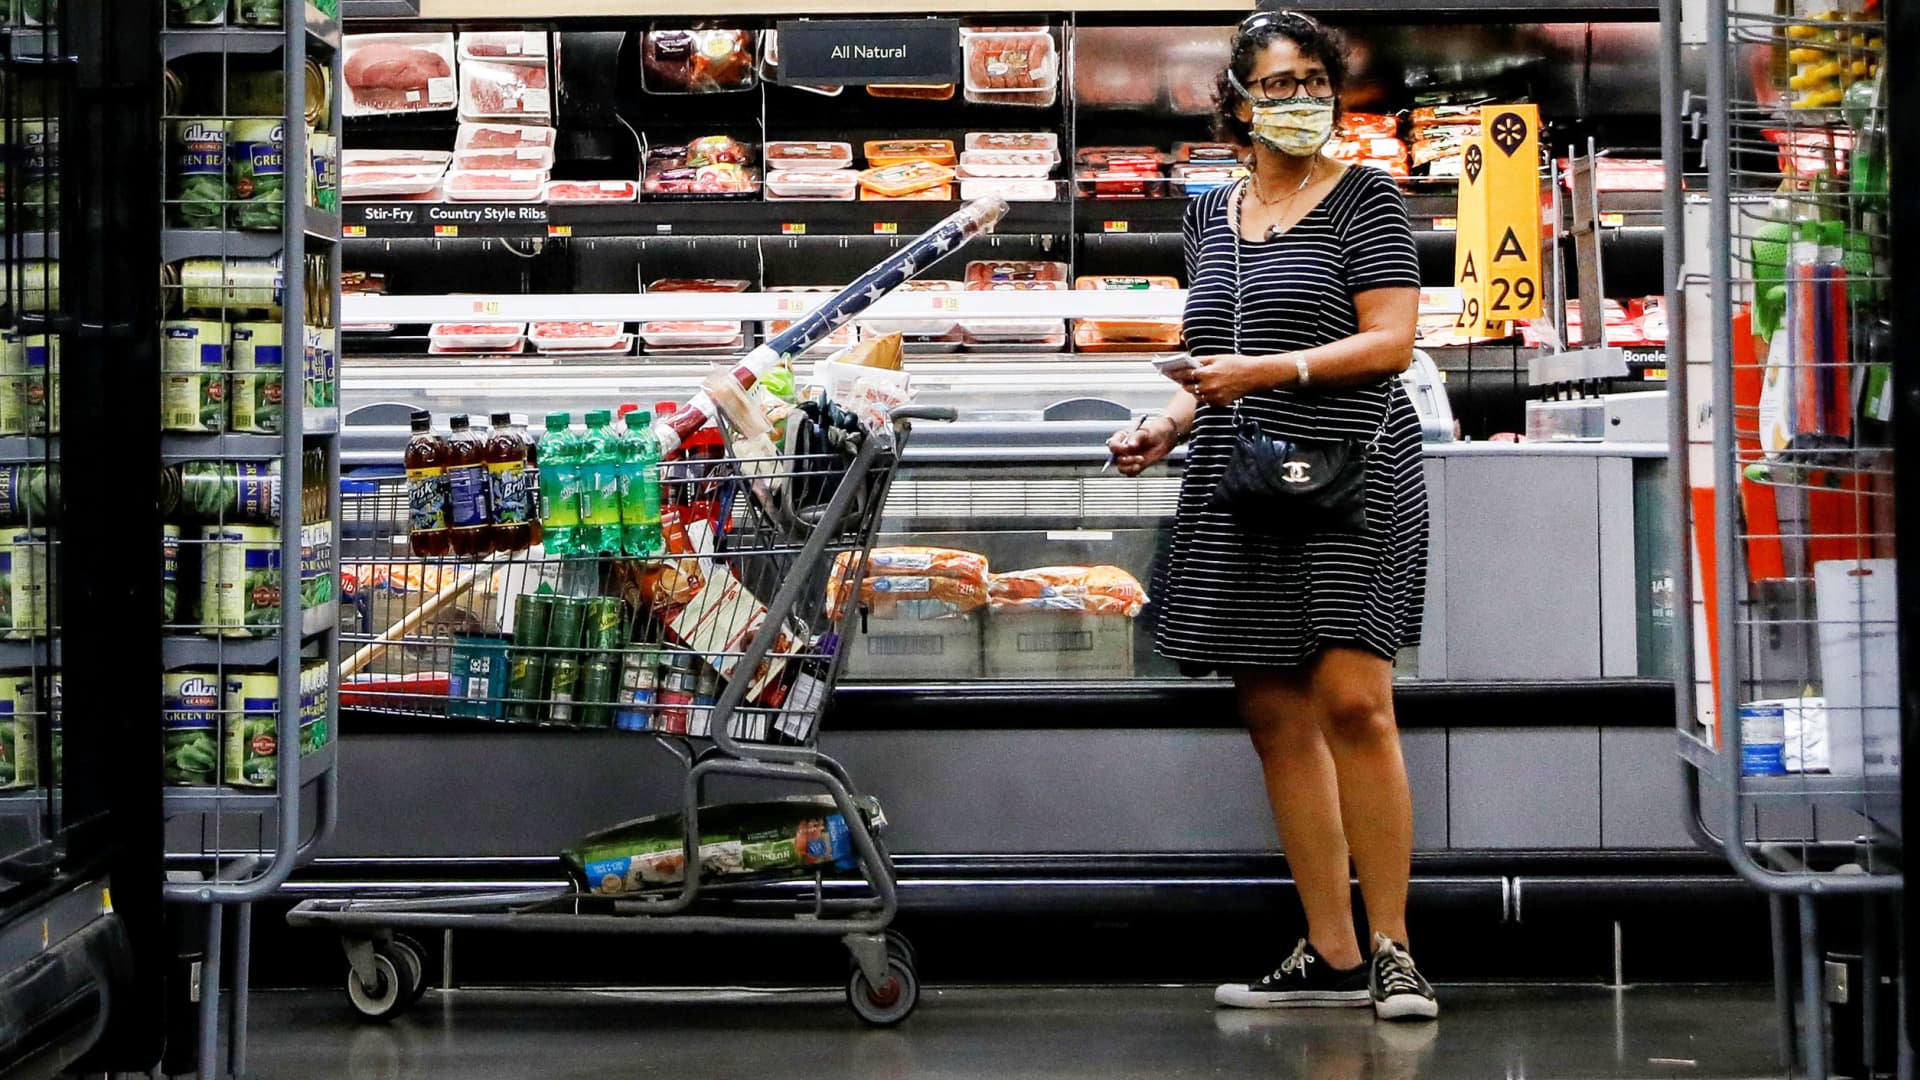 A shopper is seen wearing a mask while shopping at a Walmart store in Bradford, Pennsylvania, July 20, 2020.